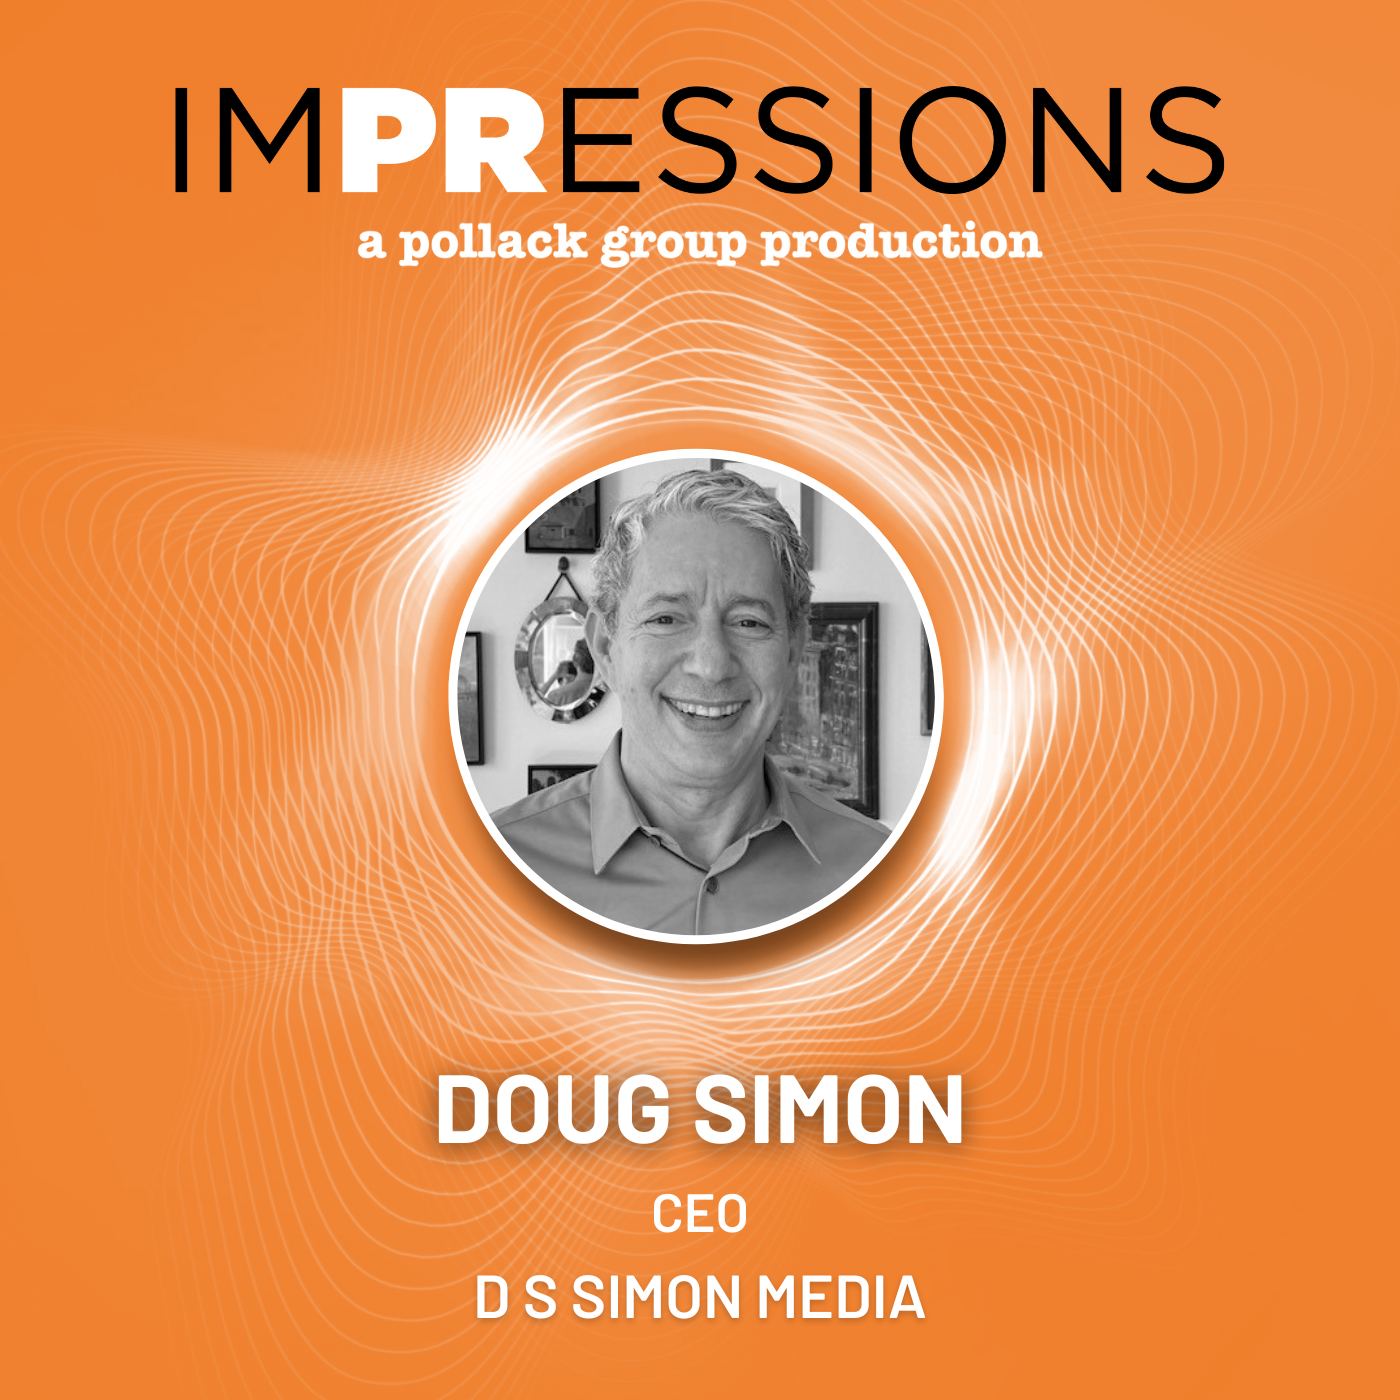 Promotional graphic with CEO Doug Simon's photo for IMPRESSIONS podcast by Pollack Group.